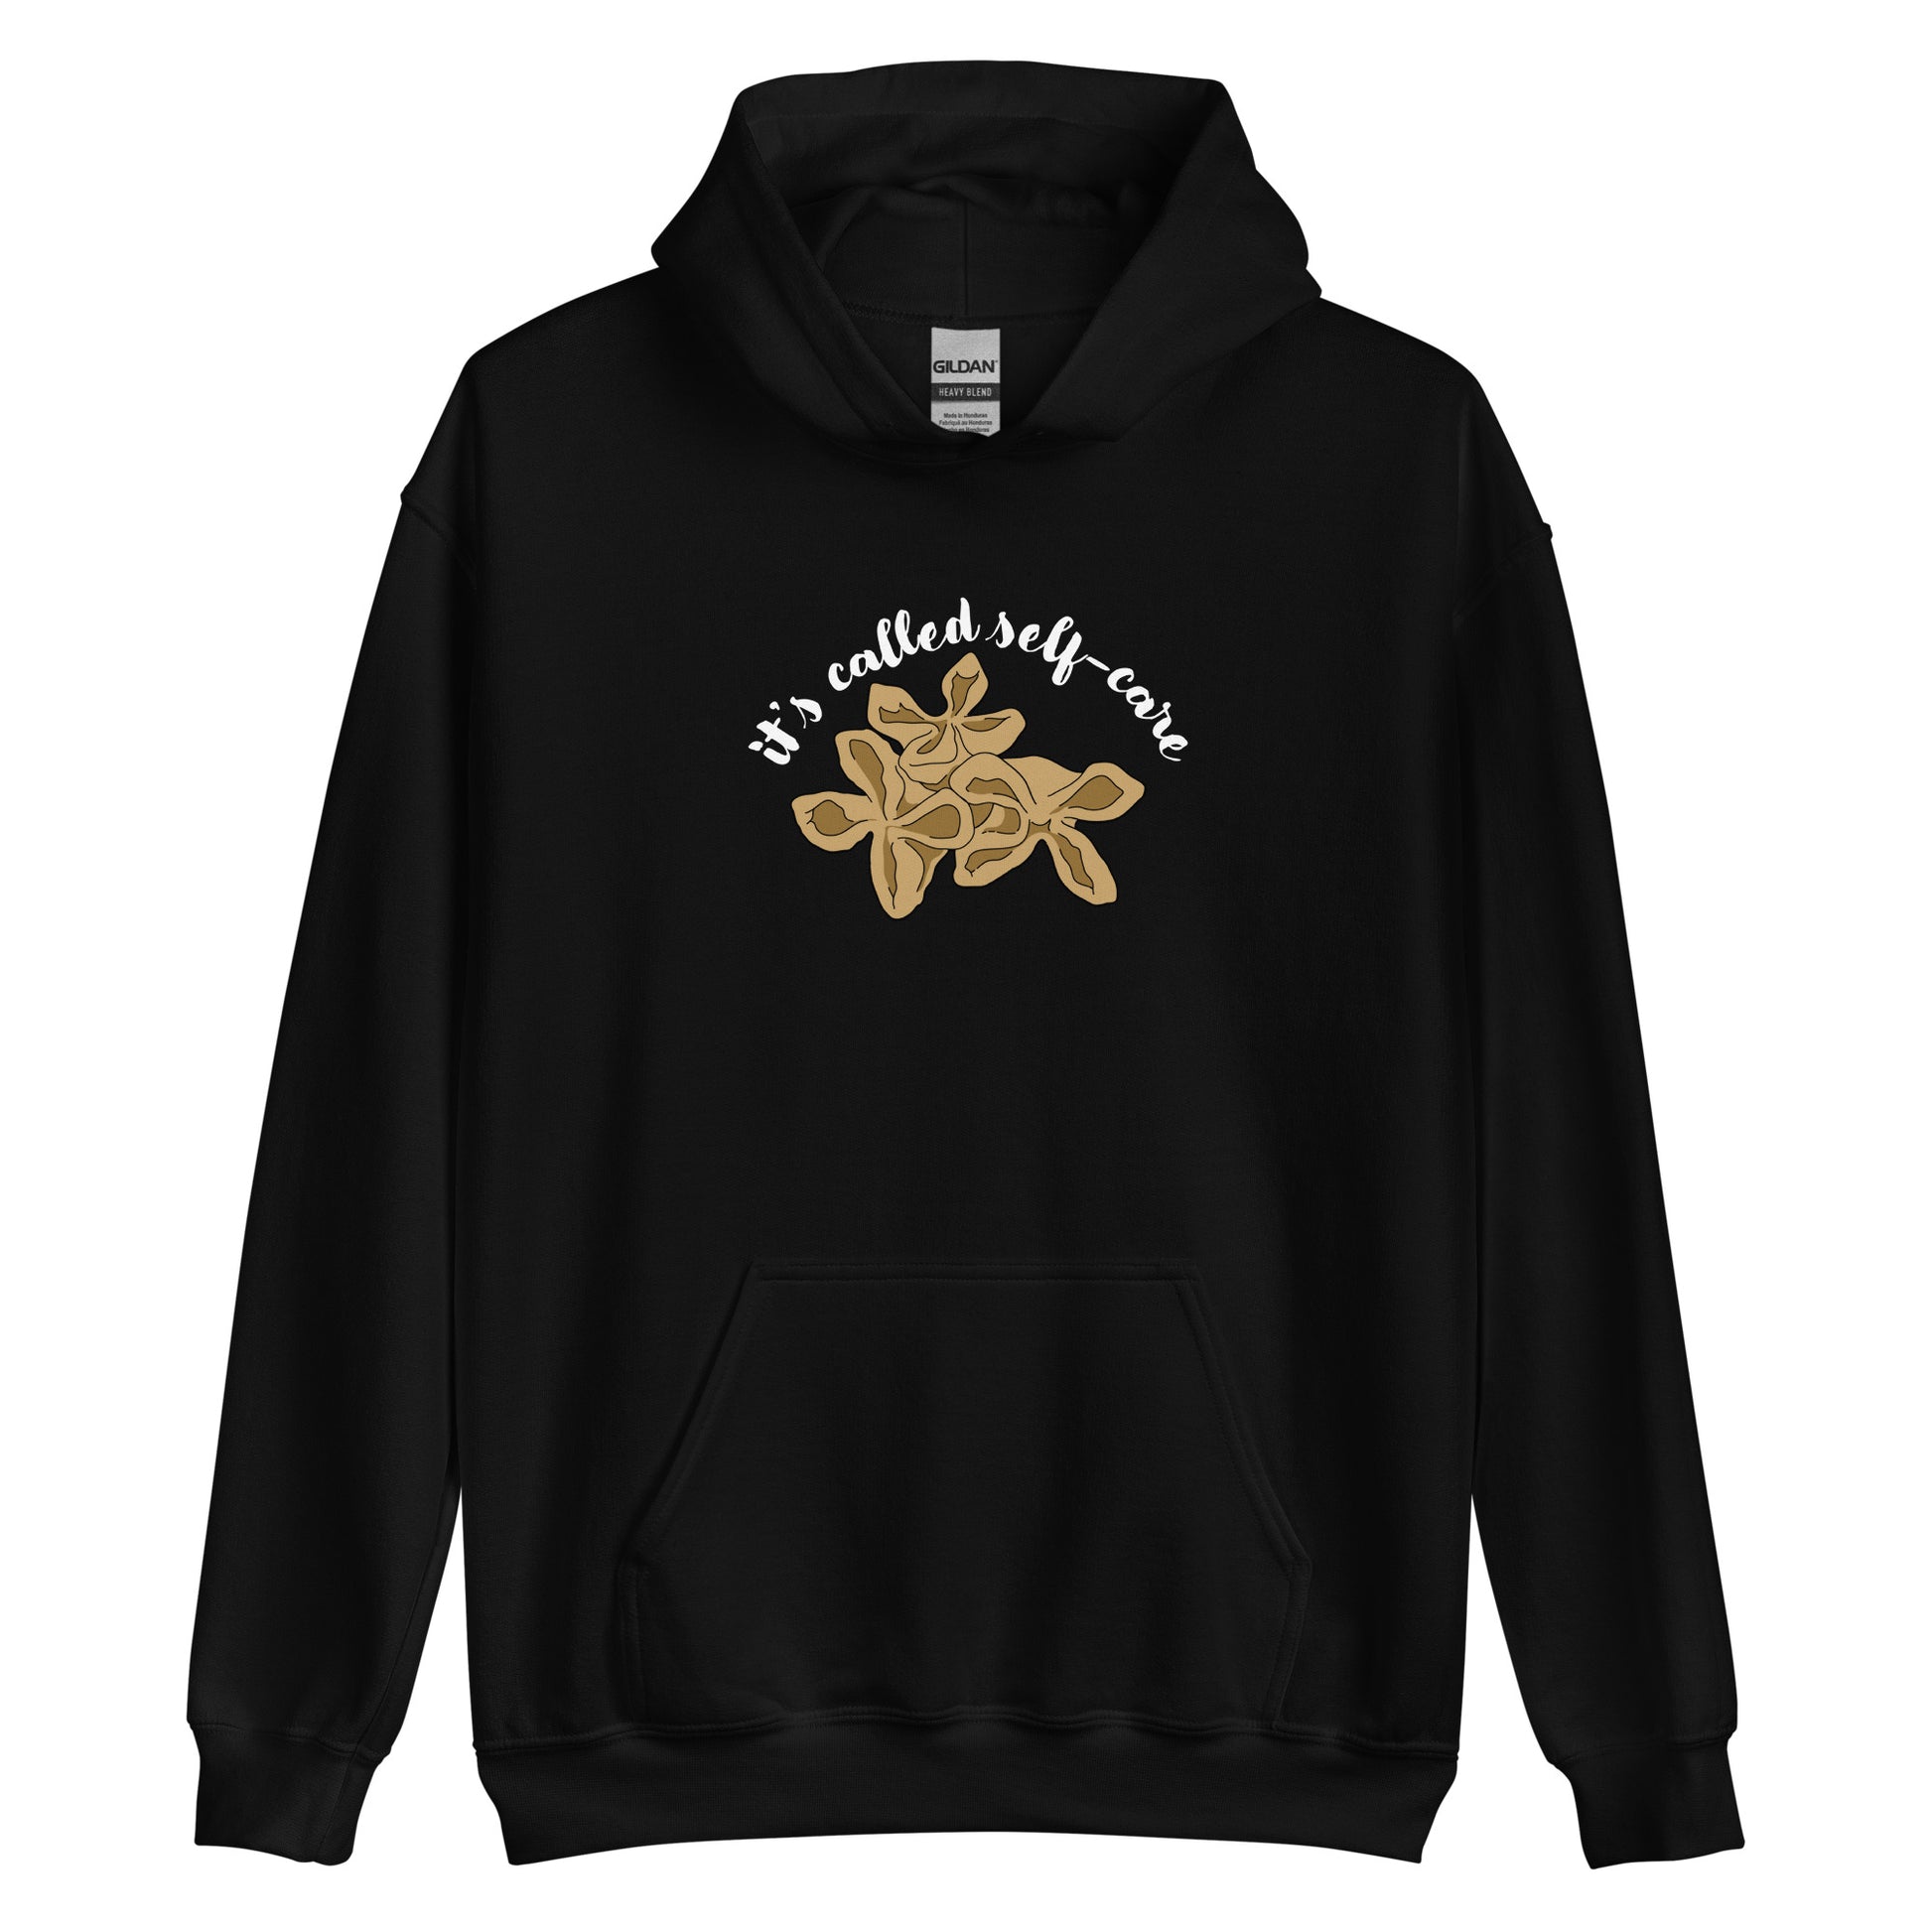 A black hooded sweatshirt featuring an illustration of three pieces of crab rangoon. Text in an arc above the crab rangoon reads "it's called self-care" in a cursive script.